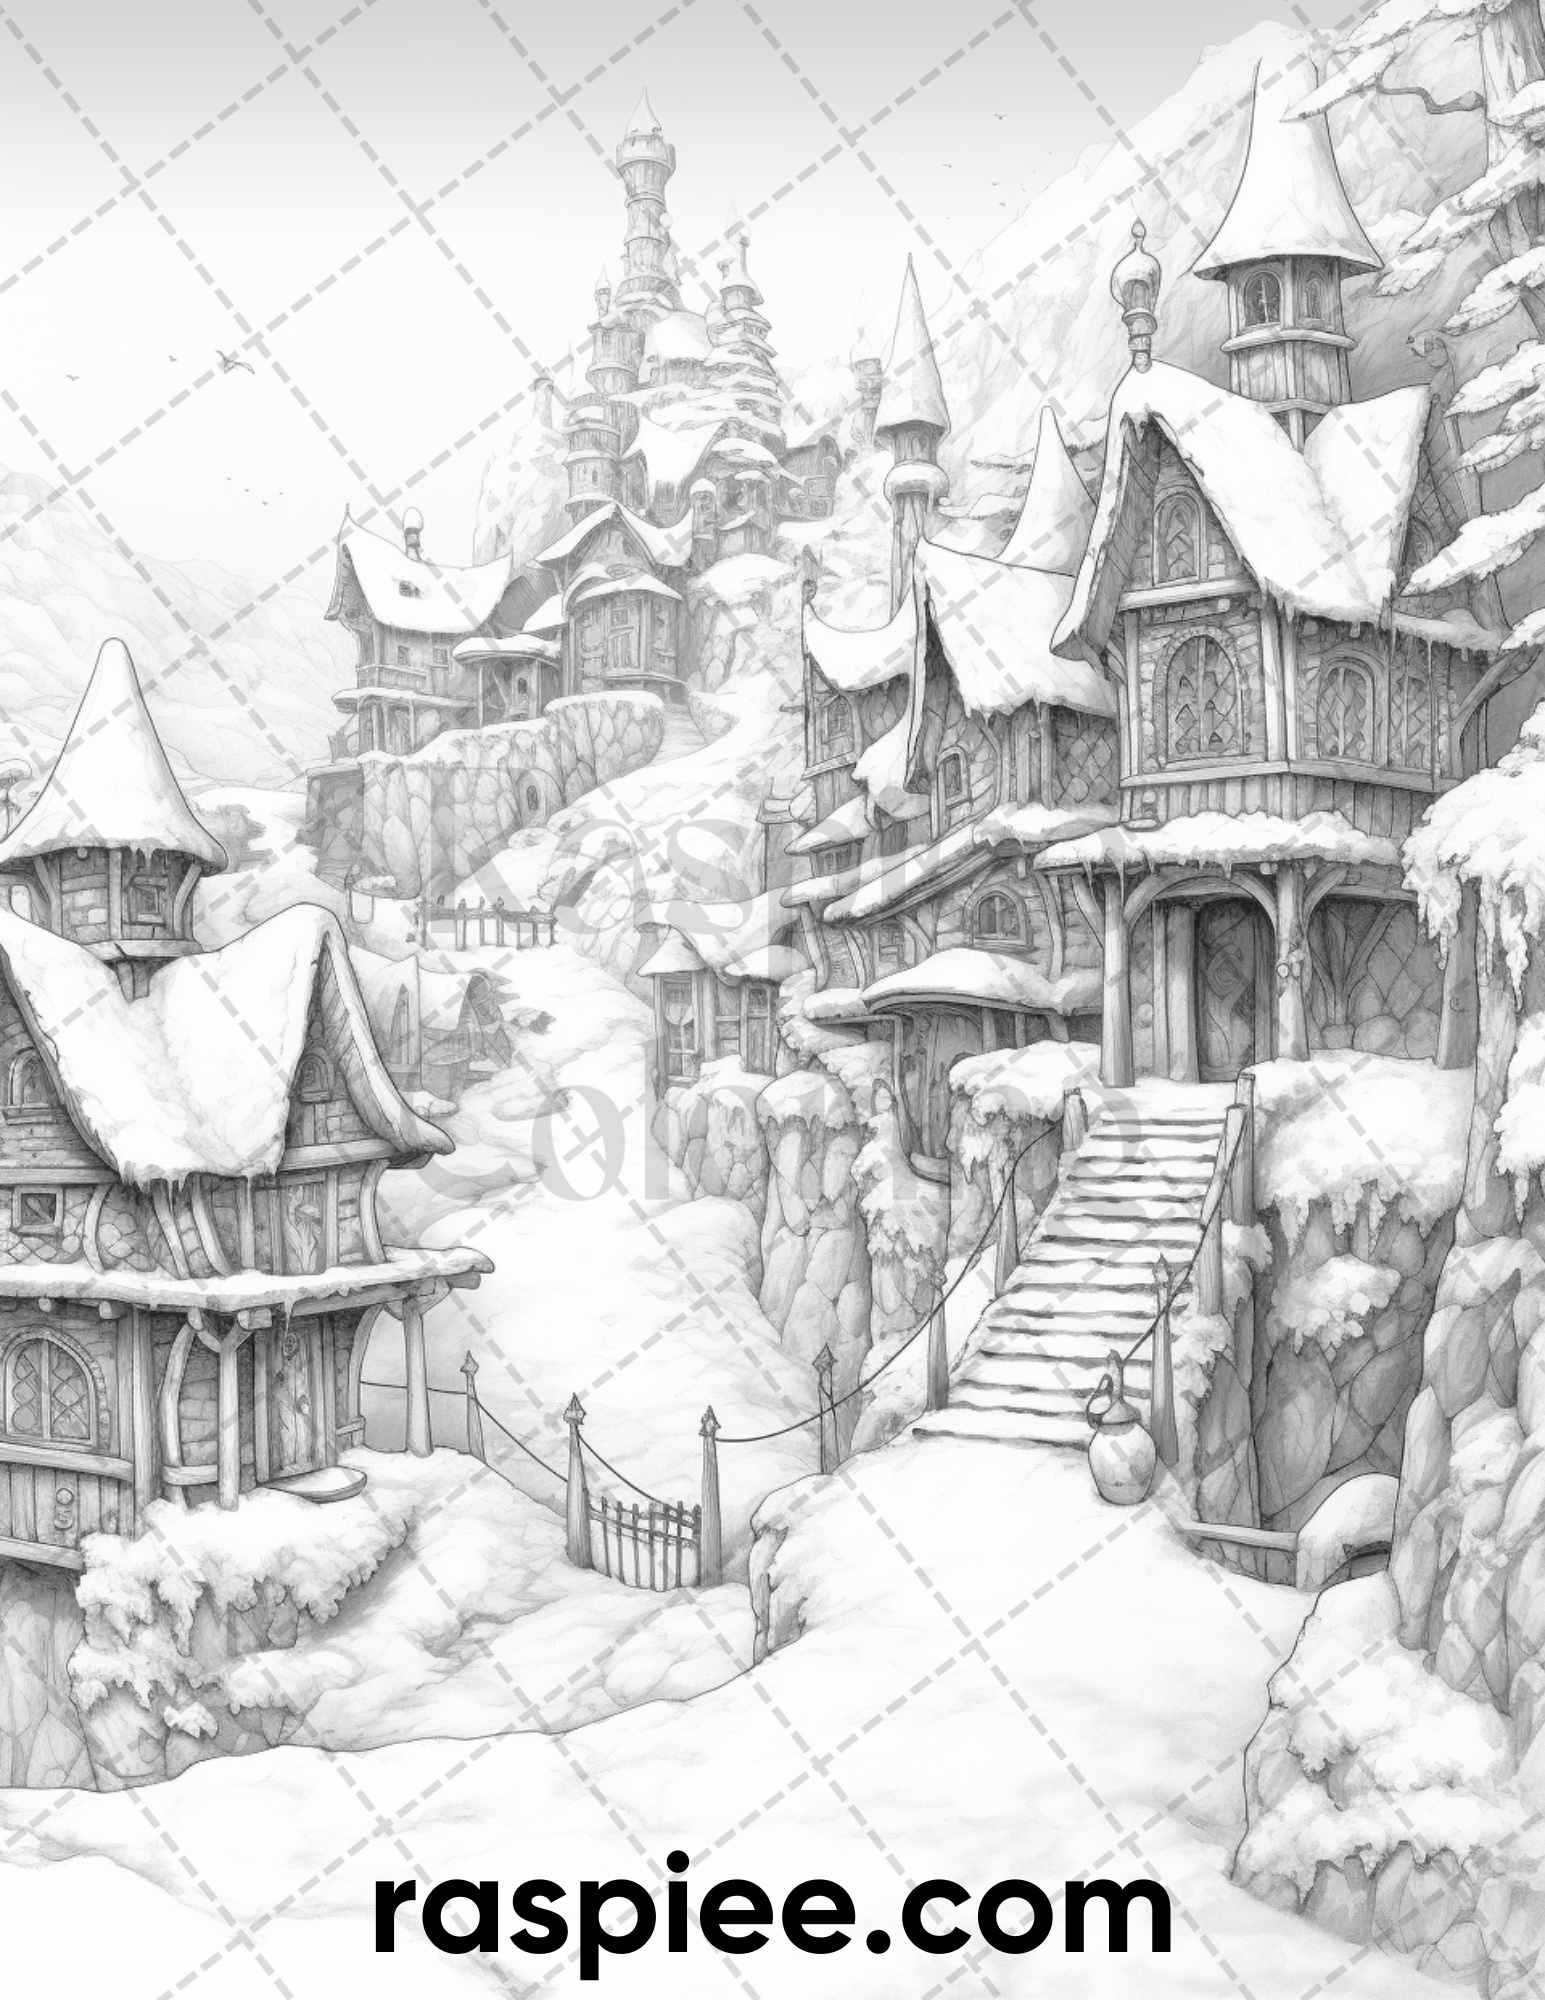 Winter Village Coloring Page, Fantasy Adult Coloring Illustration, Grayscale Coloring Sheet, Detailed Coloring Artwork, Relaxing Coloring Activity, Instant Download Coloring Print, Winter Landscape Coloring Pages, Holiday Coloring Book Page, DIY Coloring Gift Idea, Christmas Coloring Pages, Stress-Relief Coloring Page, Winter-Themed Coloring Printable, Fantasy Coloring Pages